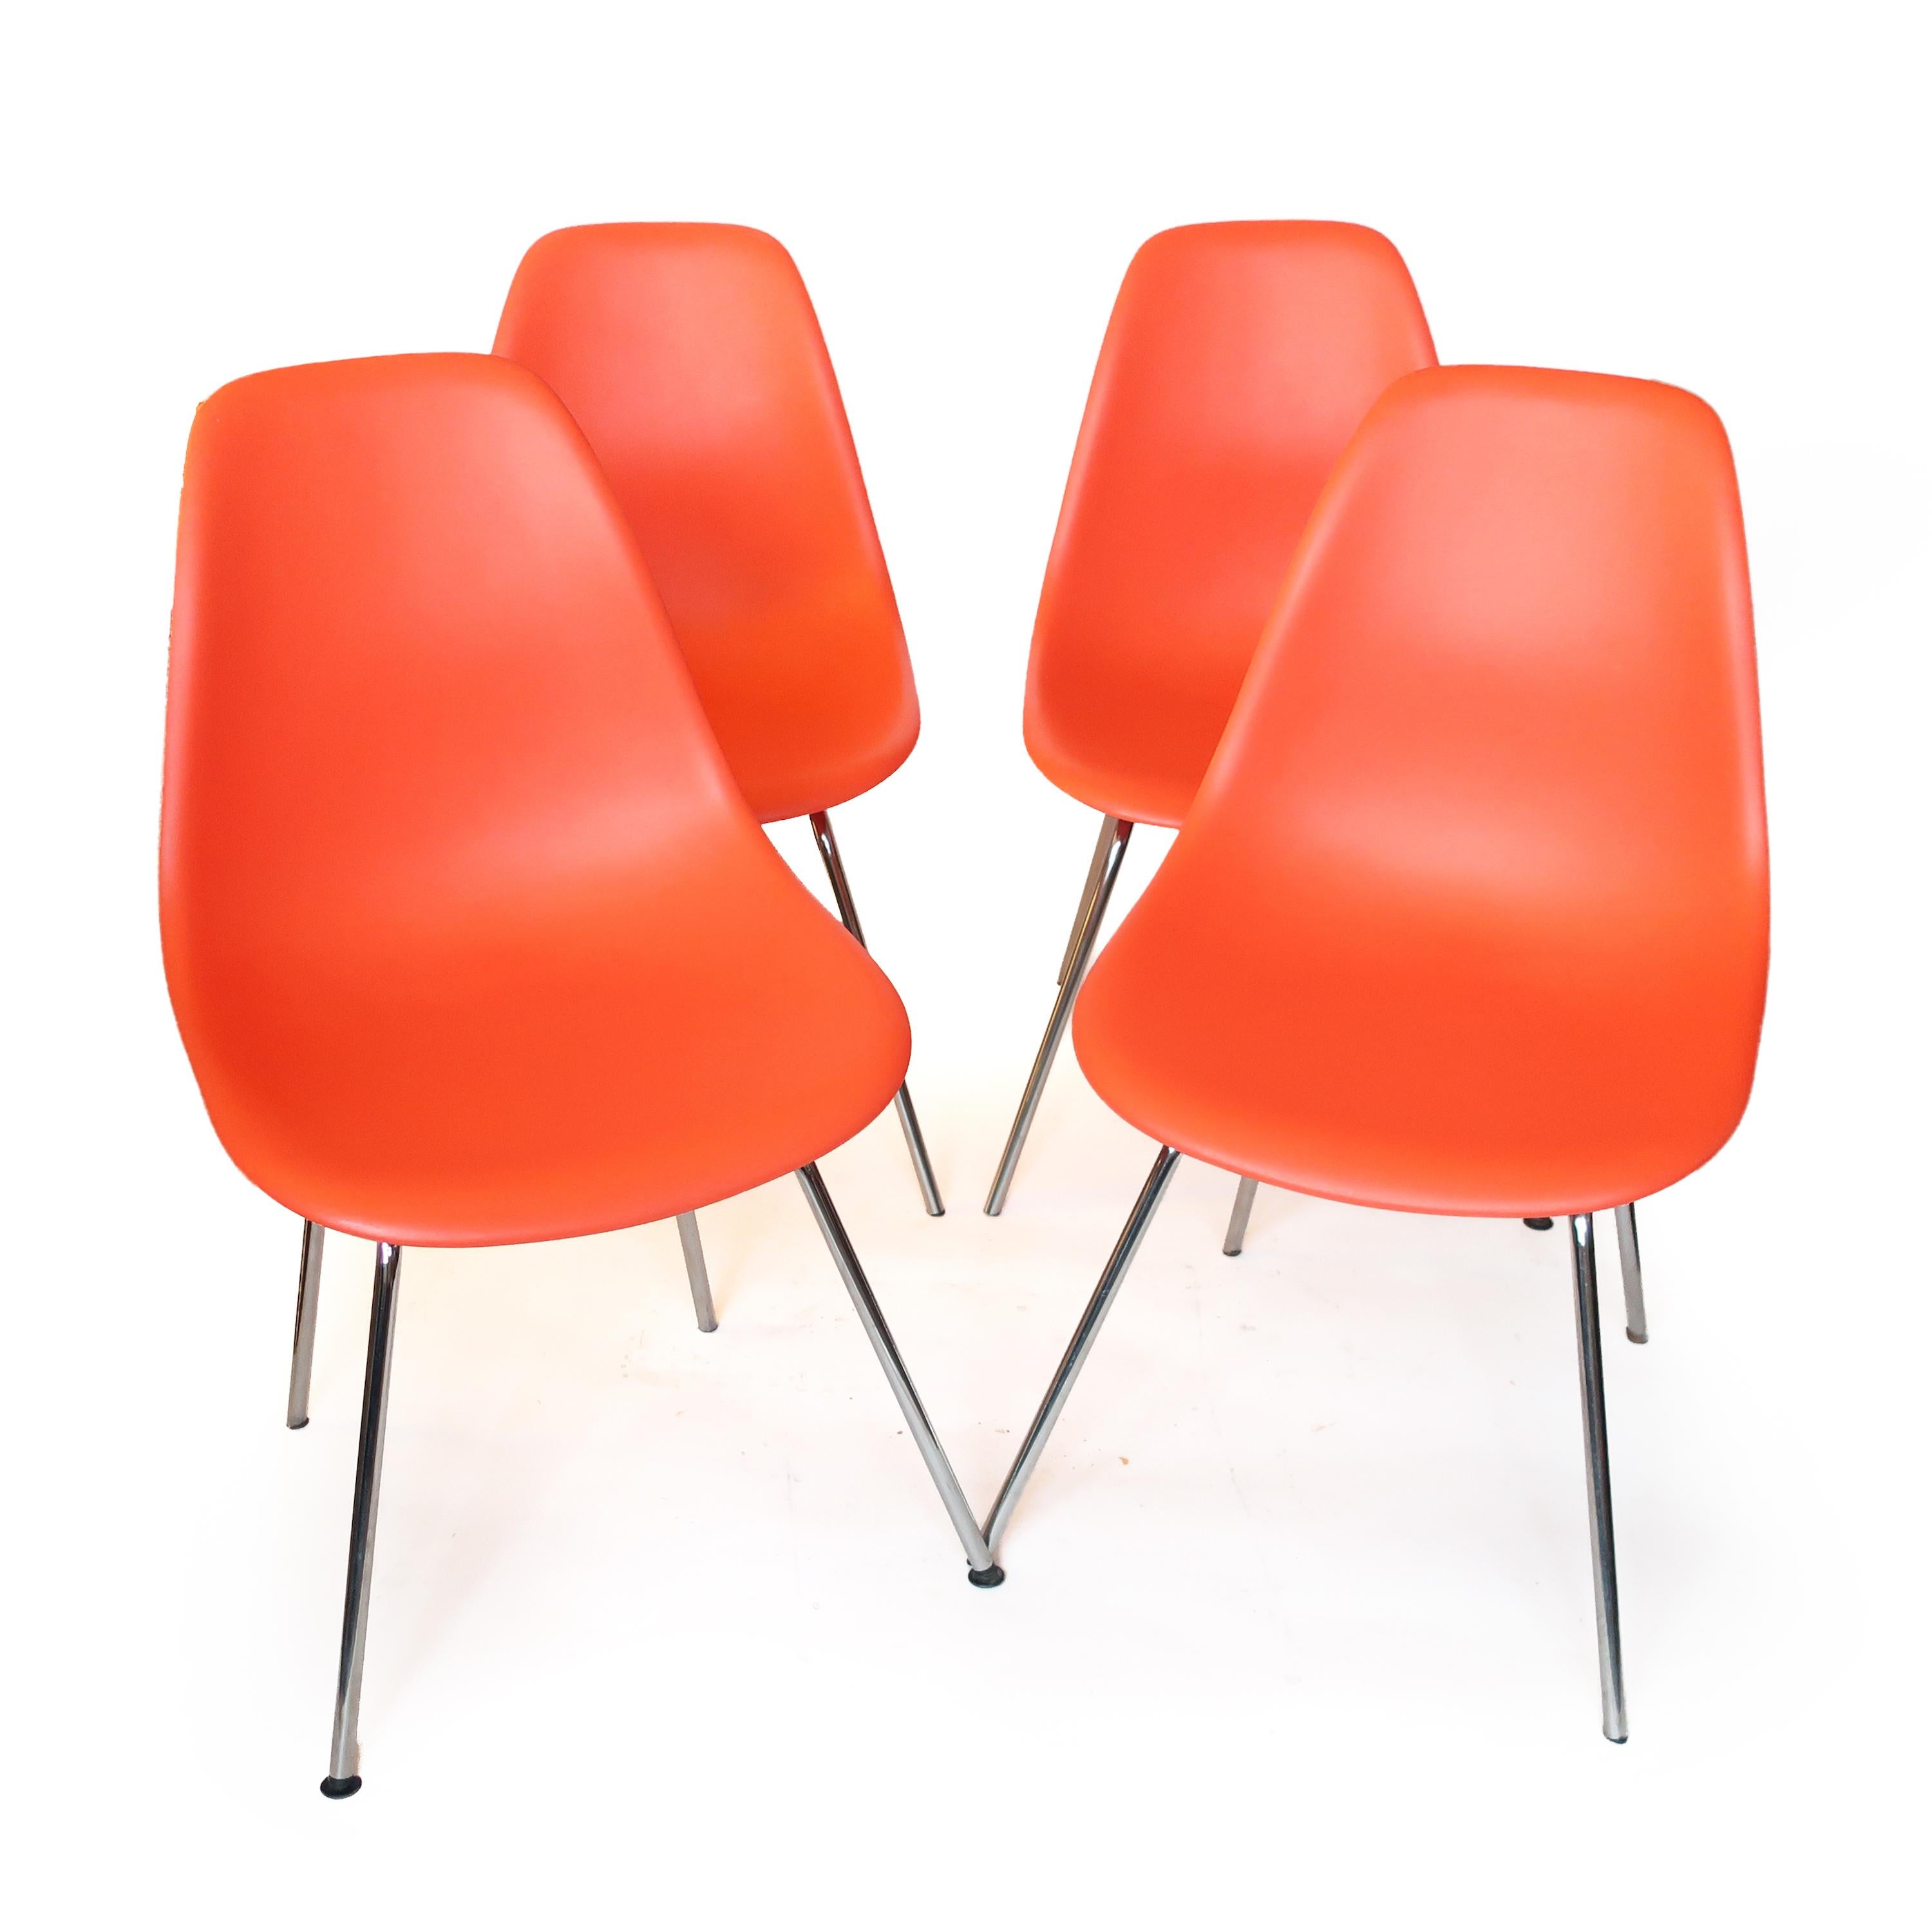 A classic set of four plastic dining chairs designed by Ray and Charles Eames for Herman Miller. Shells are red orange and the bases are chrome. All chairs are from same owner so they have aged together and are an original set. 

In very good